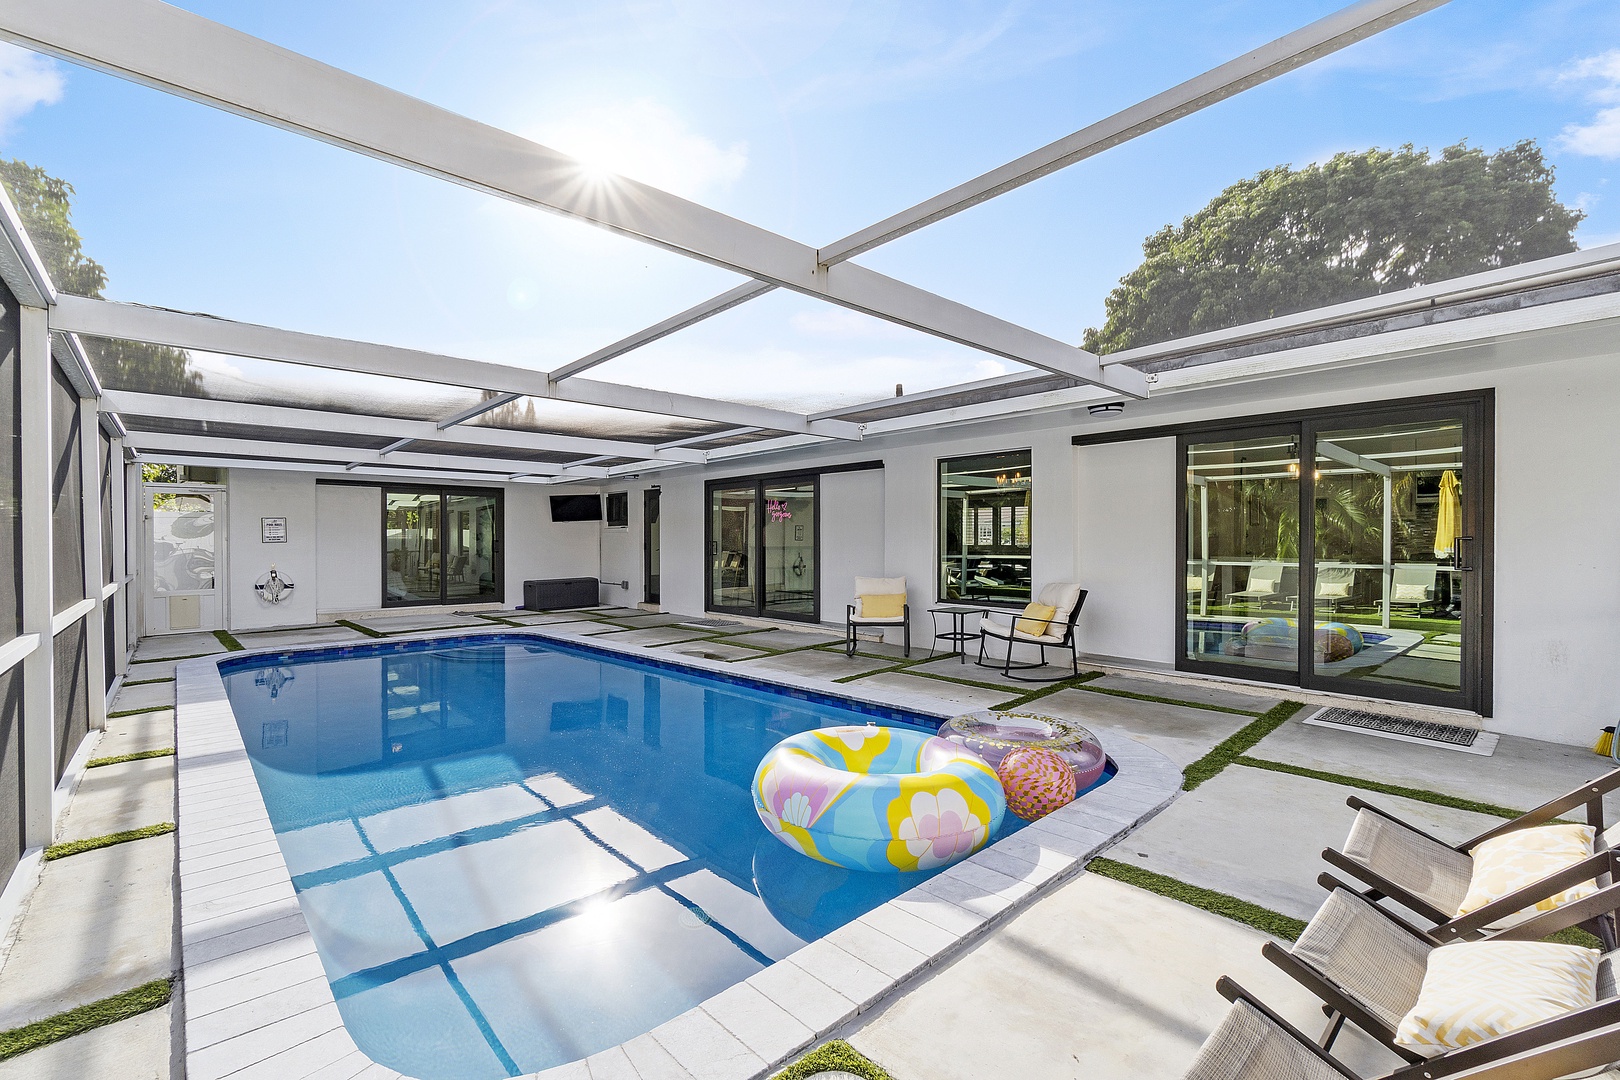 Indulge in your own private pool oasis